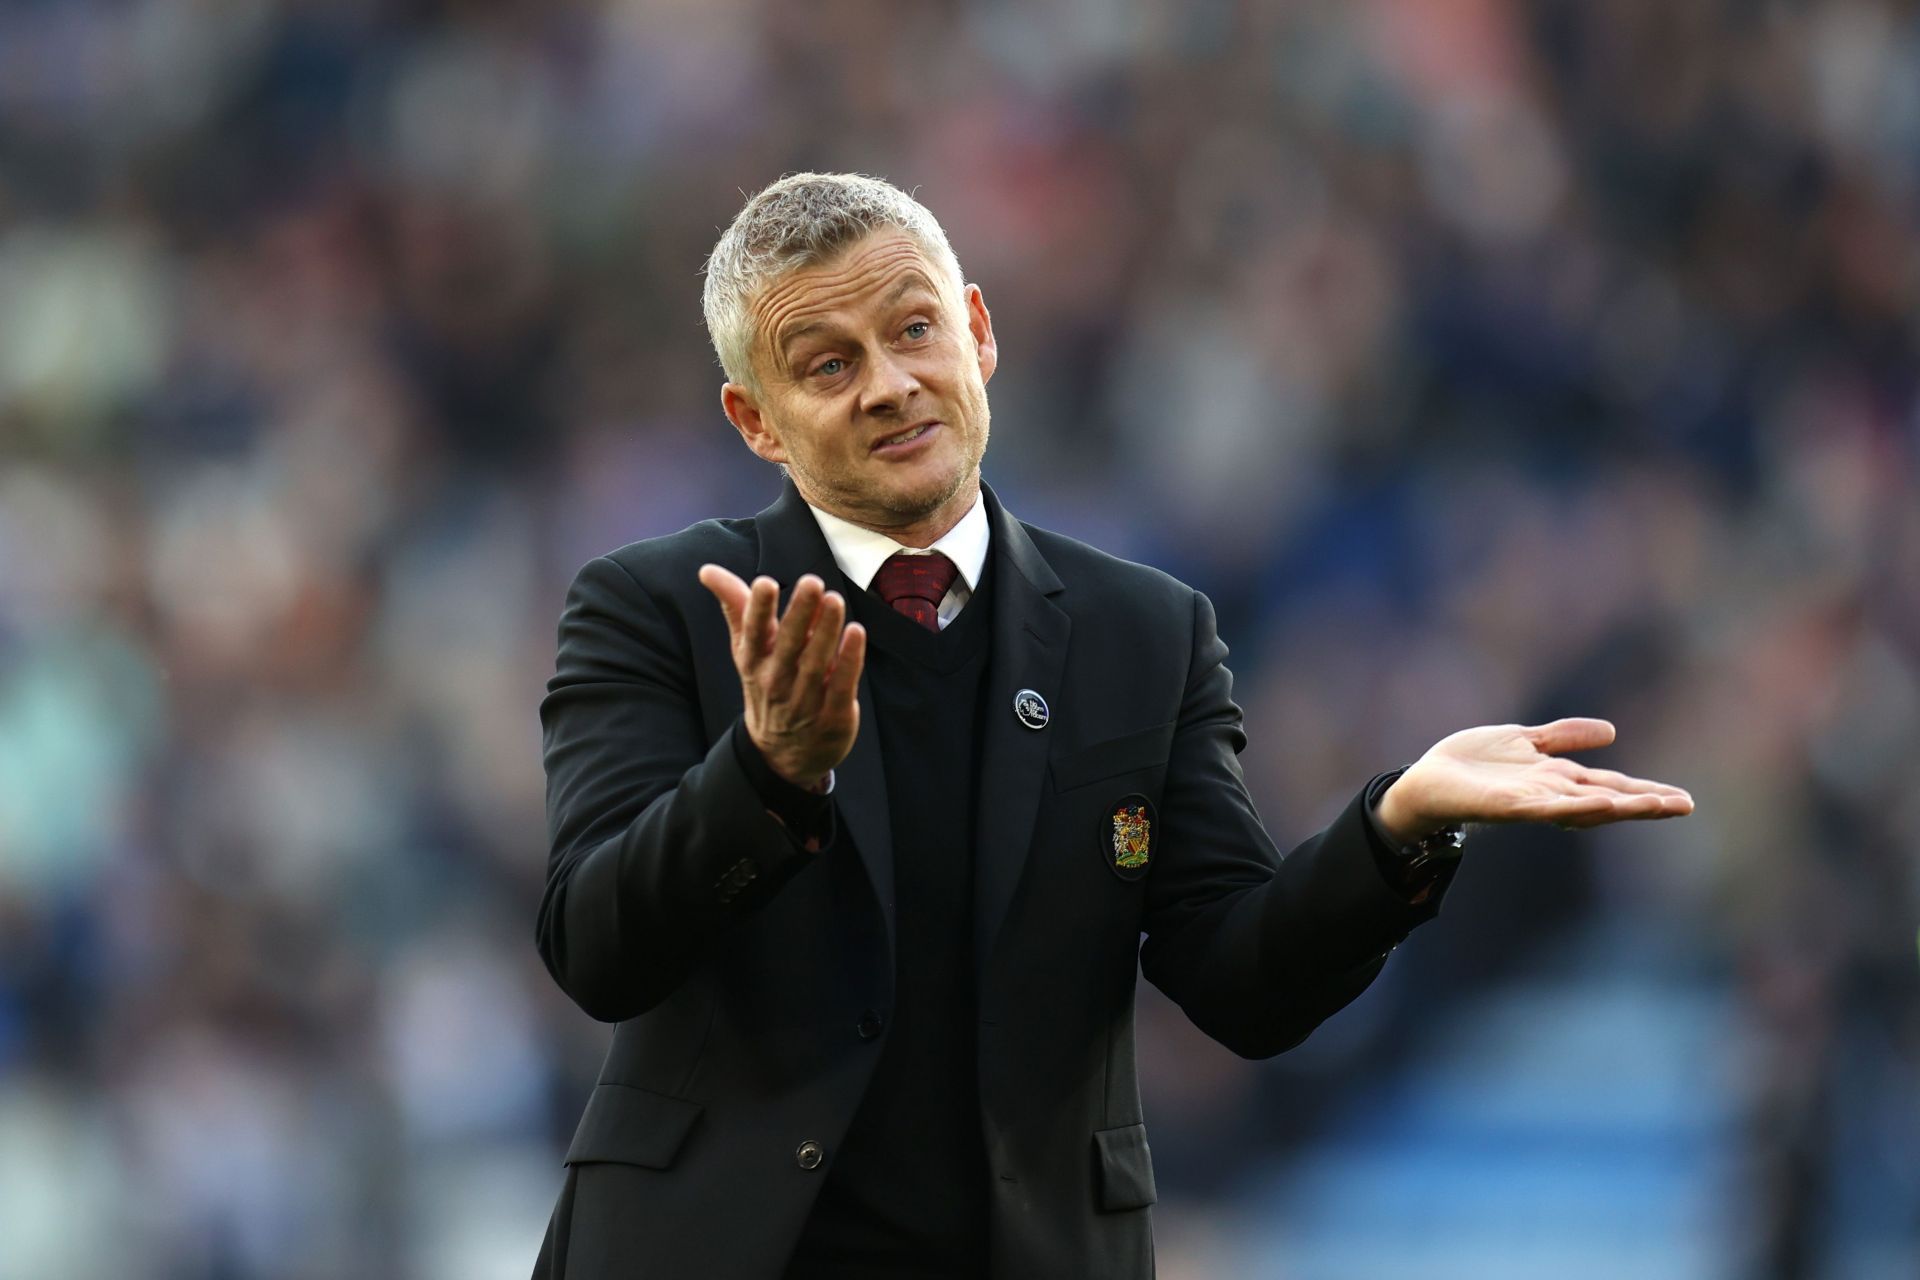 Ole Gunnar Solskjaer is in the hot seat at Manchester United.